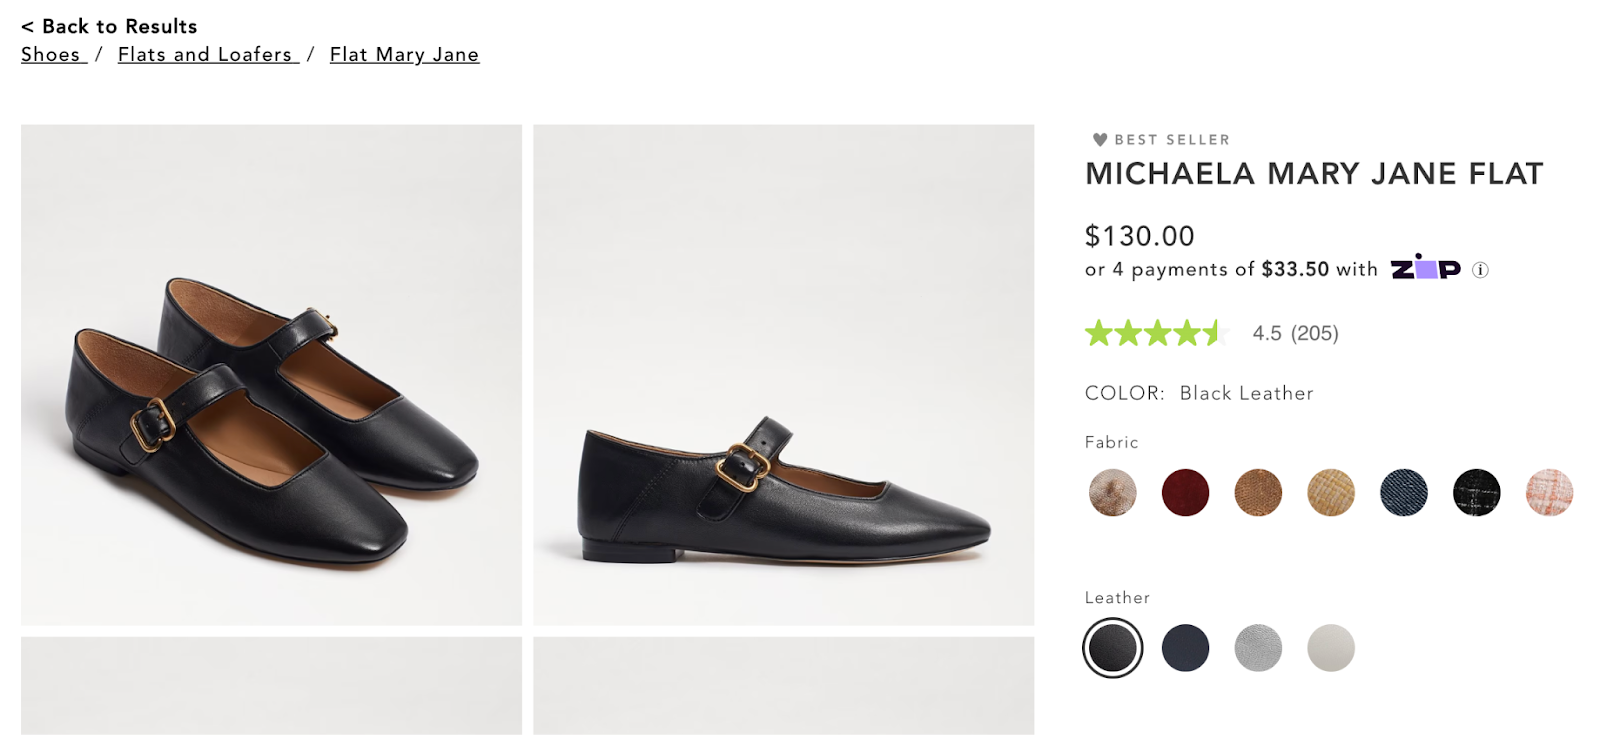 technical seo for ecommerce: A product page for Mary Jane flats from Sam Edelman.